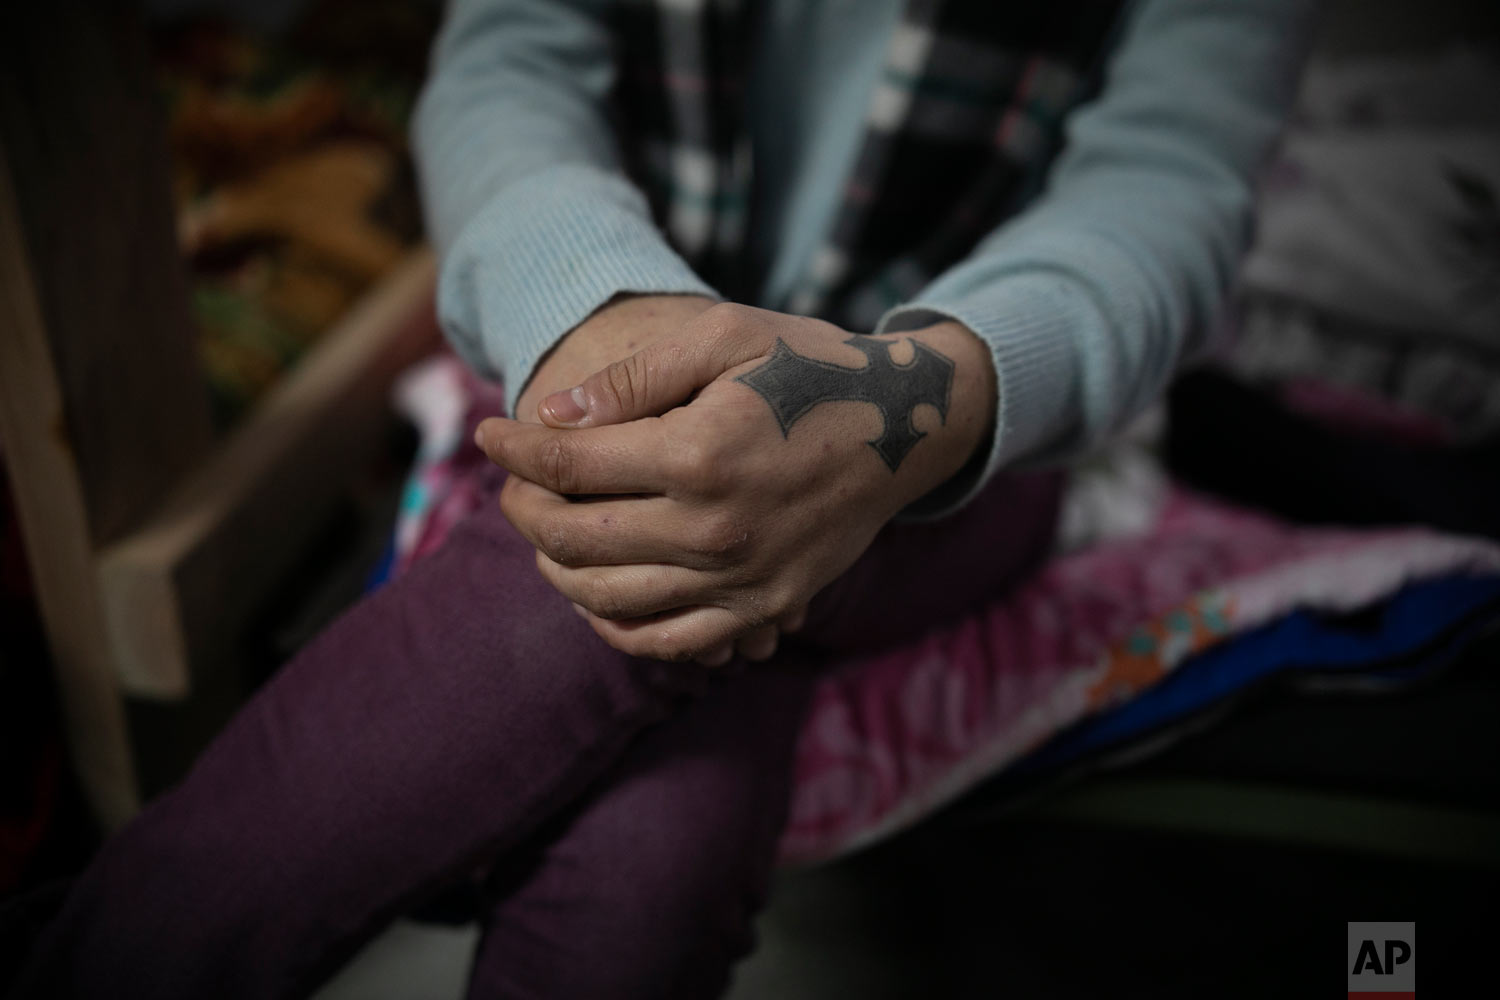  Xiomara Henriquez Ayala, 13, from El Salvador, sits on her sister Milagro's bed as they talk about their day, in a shelter for migrants on the outskirts of Tijuana, Mexico, Feb. 4, 2019. (AP Photo/Emilio Espejel) 